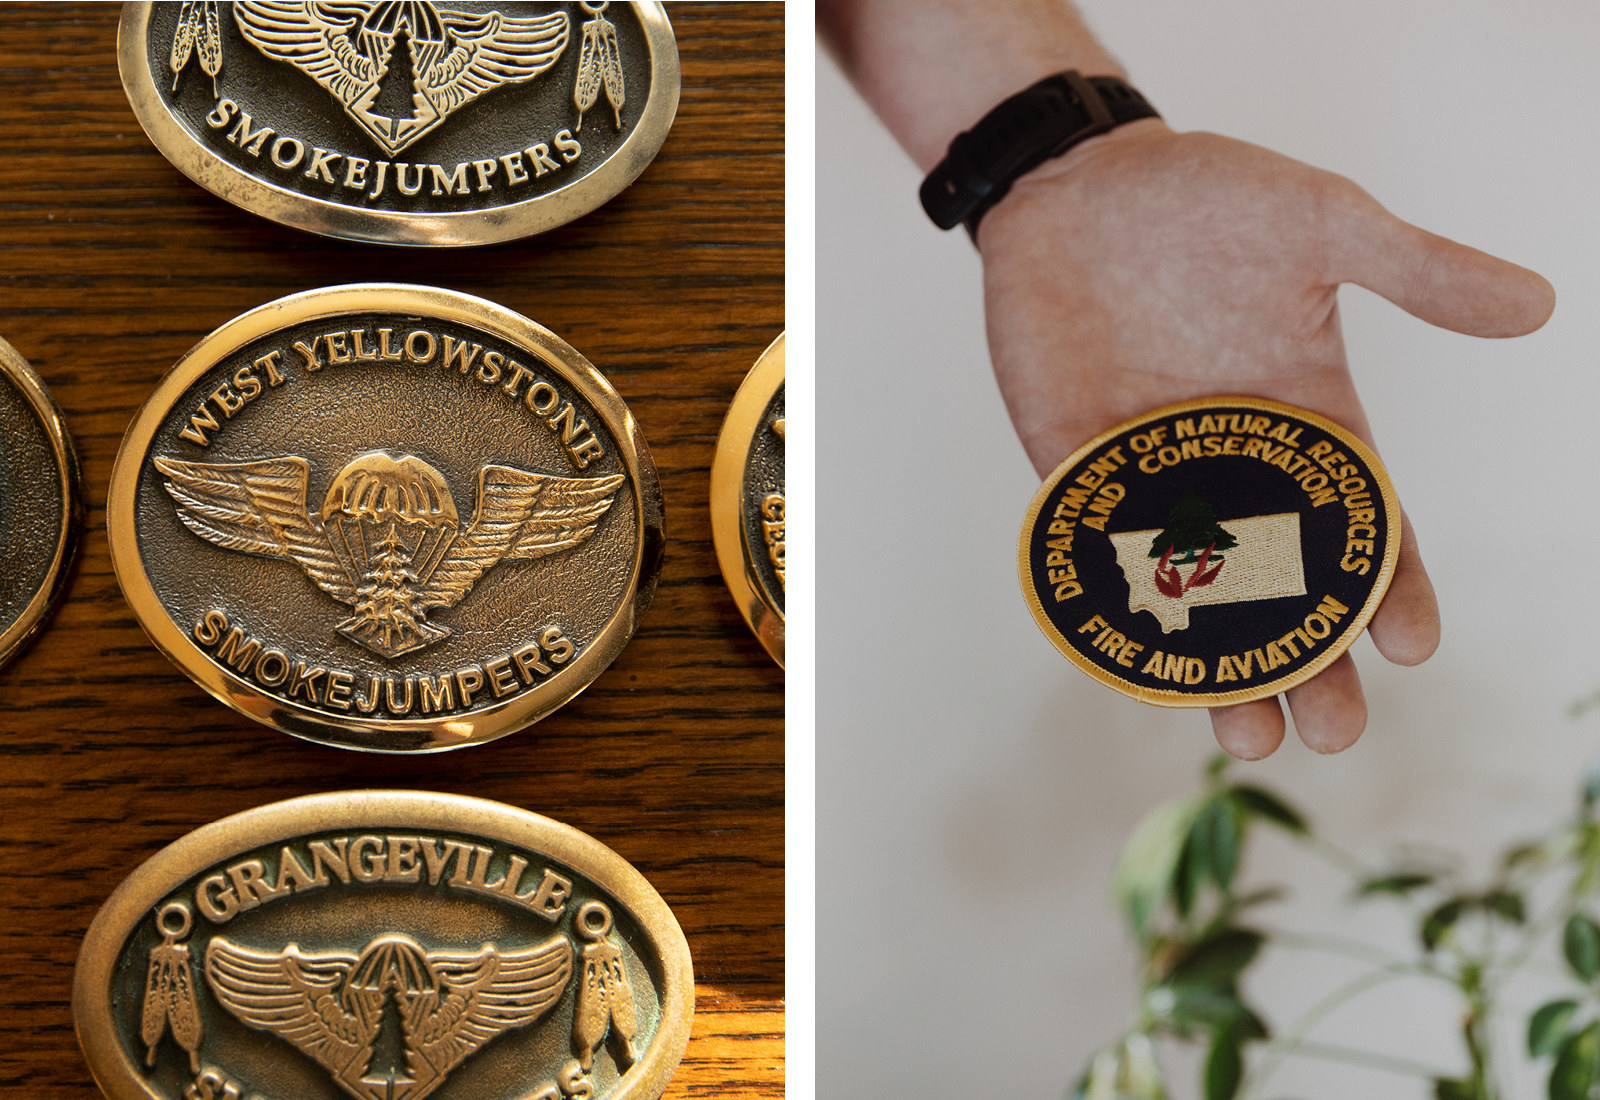 Left, buckles that read &quot;west yellowstone smokejumpers,&quot; right, a hand holding a patch from the Montana Department of Natural Resources and Conservation Fire and Aviation 